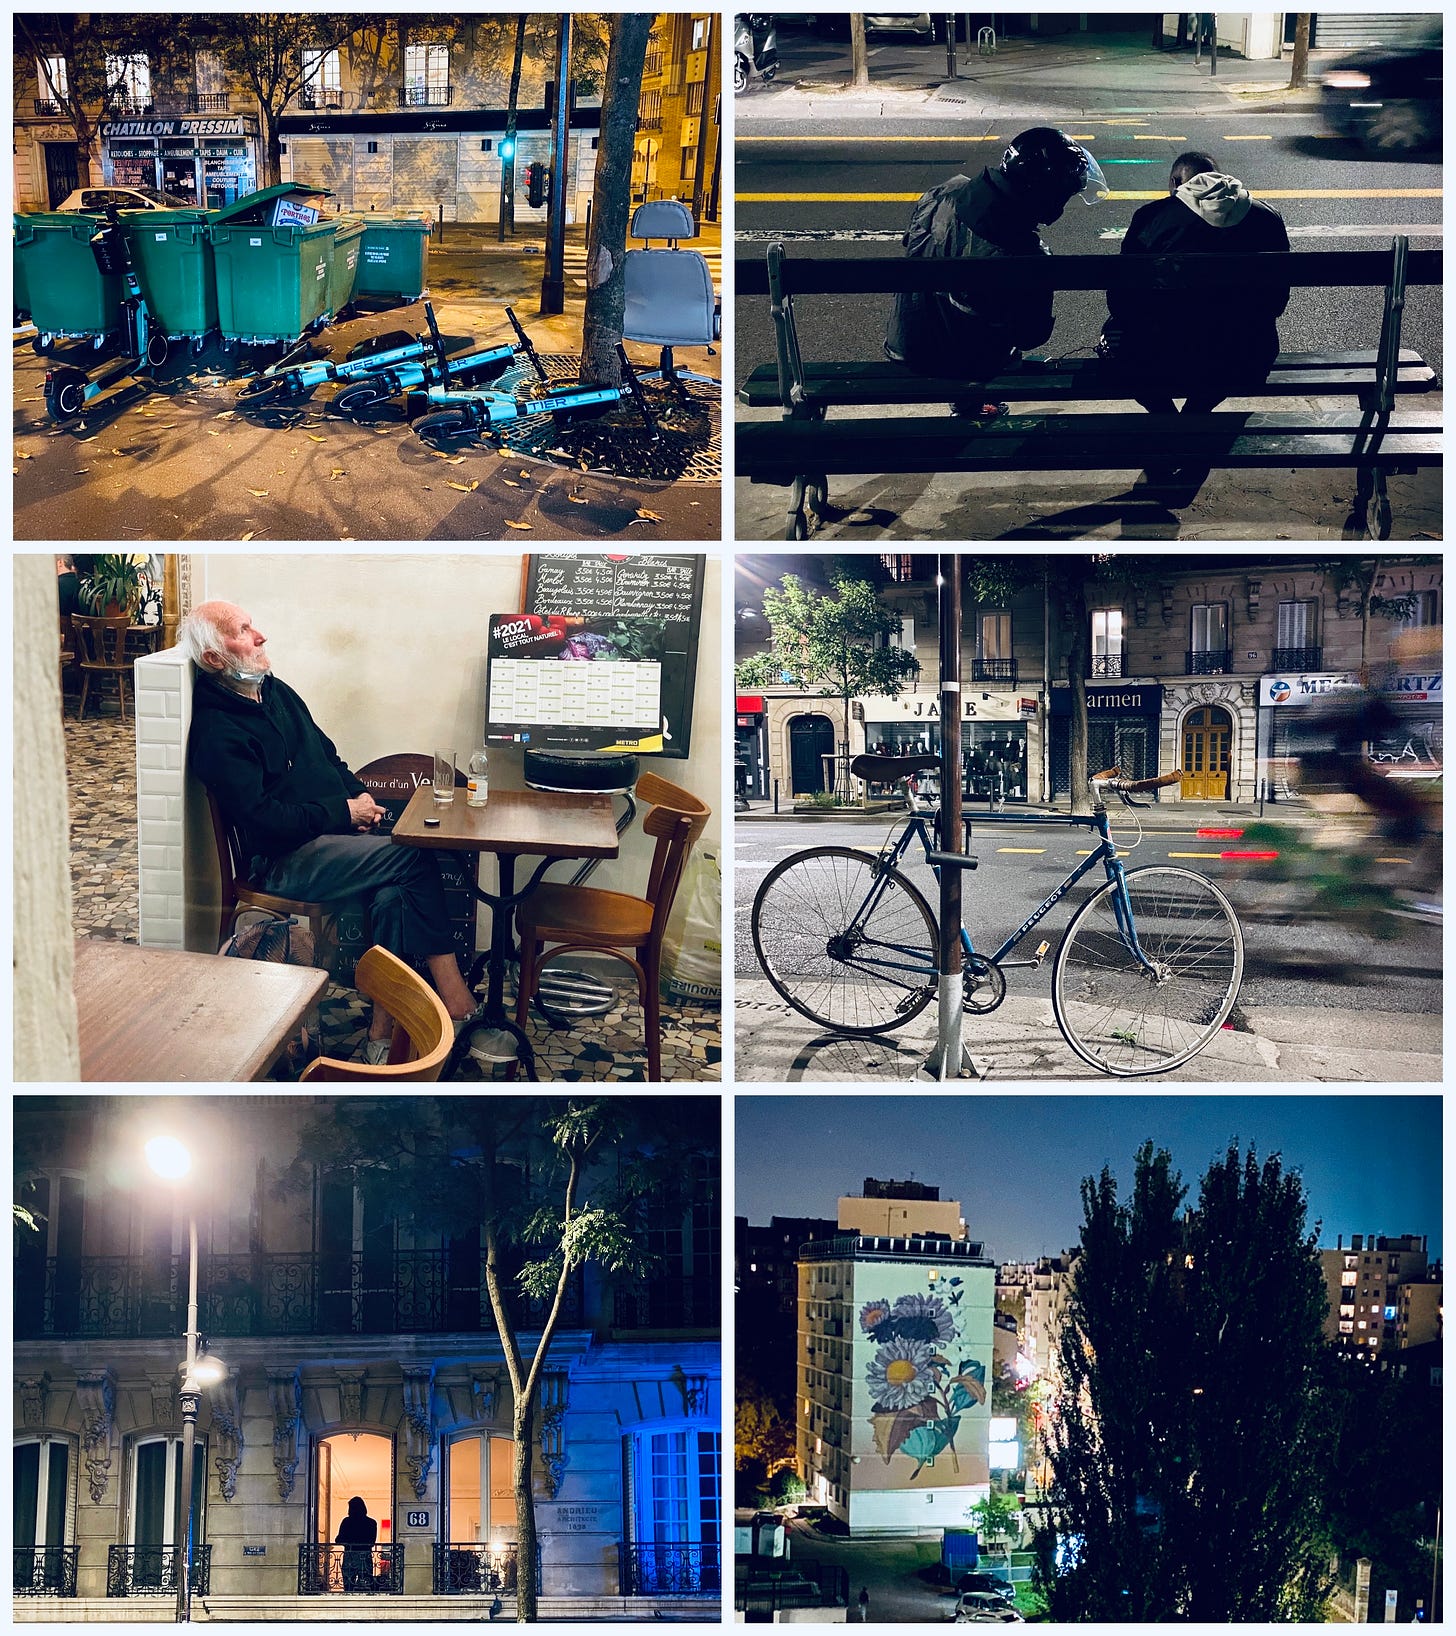 A montage of six images taken in Paris at night. Top left, a pile of rental scooters that have fallen over like dominos. Top right, Two men on a bench lean over a phone watching France lose a football match against Belgium. Center left, a man in a cafe nurses an empty glass and rests his head against a wall while watching a screen on the wall. Centre right, a single speed Peugeot bike locked to a pole on the side of a street. A blurred scooter rides by. Bottom left, a figure of a woman stands in an upstairs window. Bottom right, the view from a sixth floor window of a mural on the side of a of a block of flats.